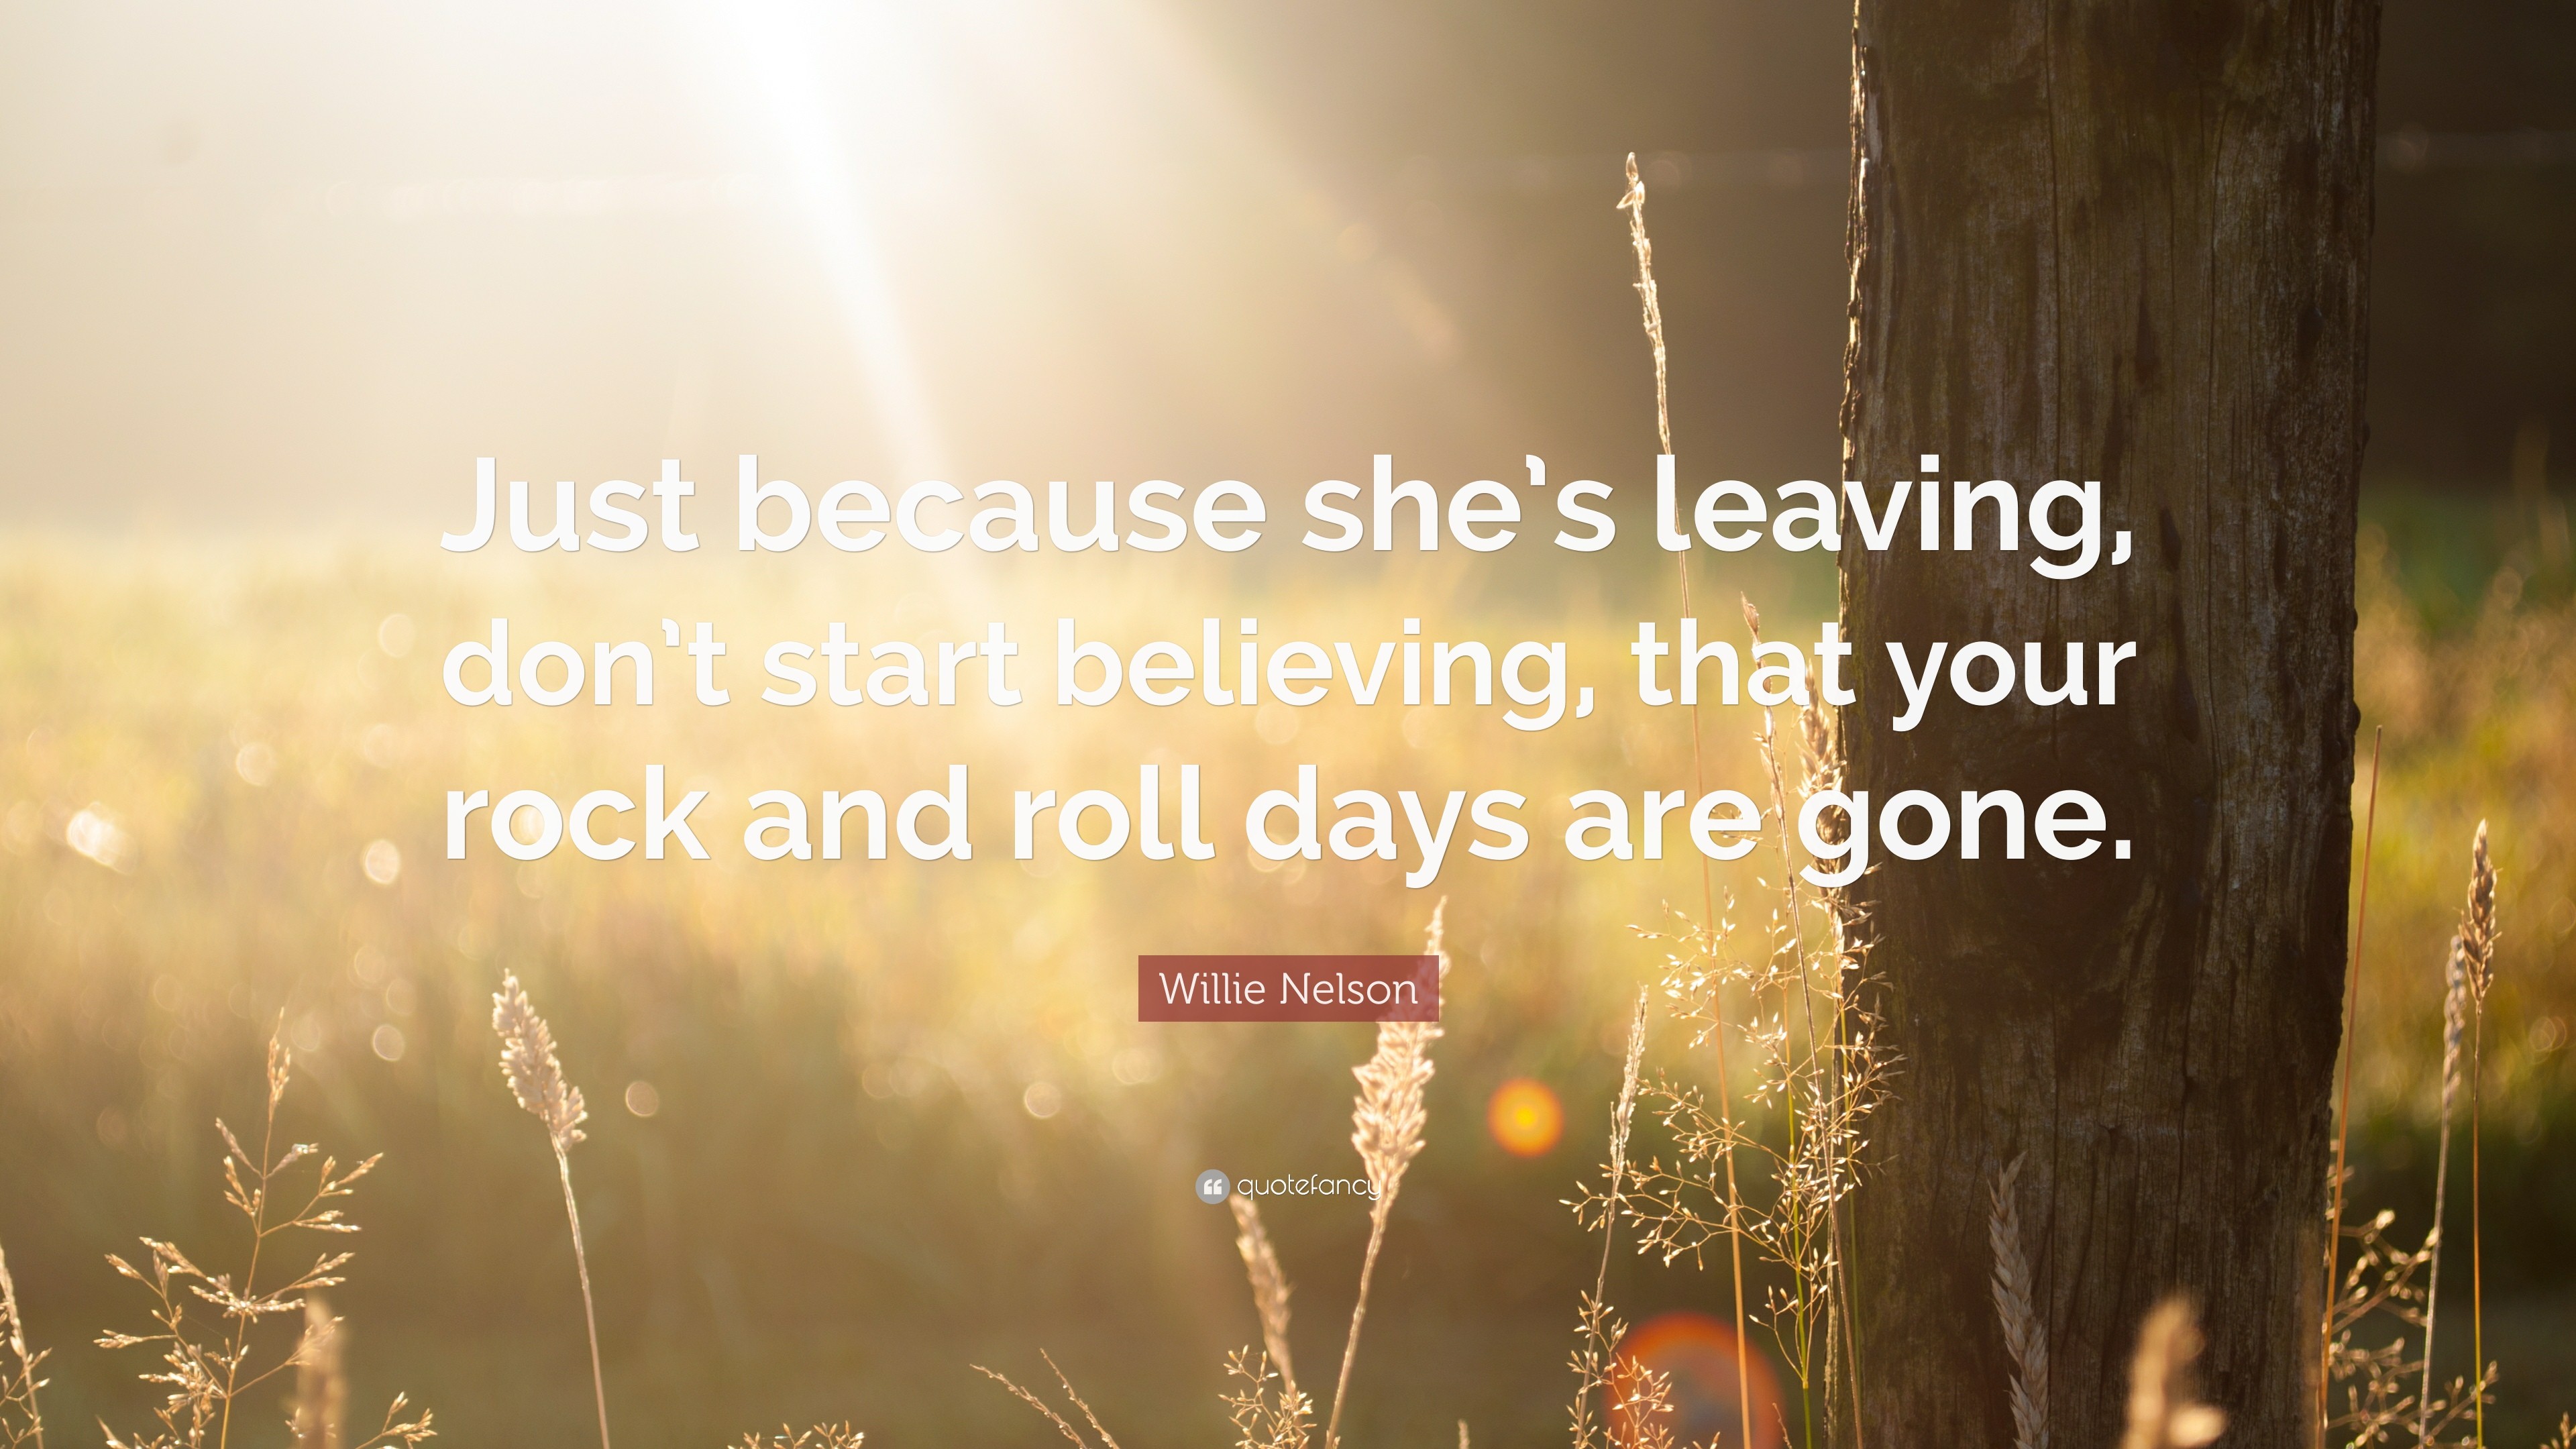 3840x2160 Willie Nelson Quote: “Just because she's leaving, don't start believing,